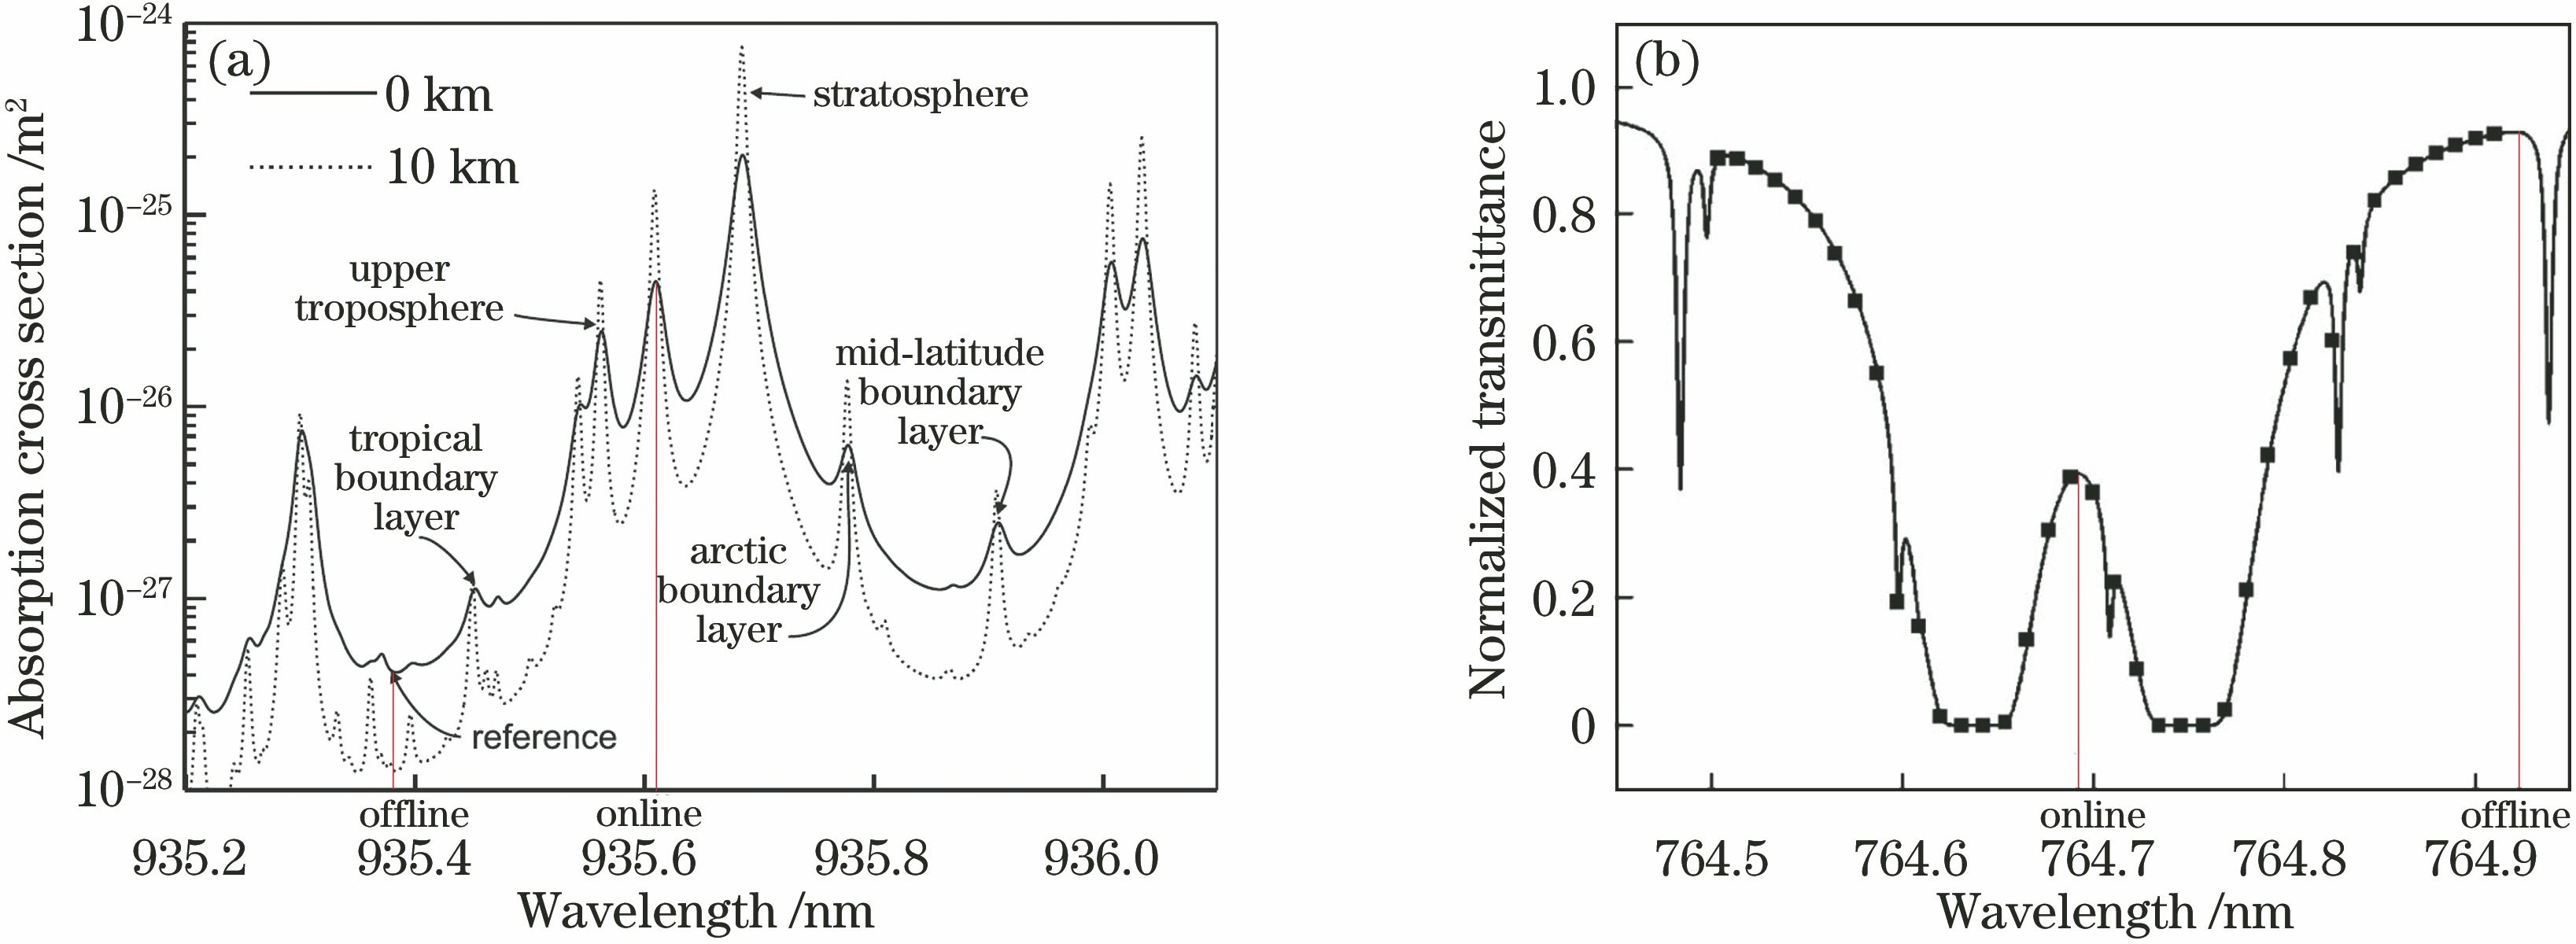 Absorption and transmittance spectra. (a)Absorption spectrum of water vapor in the NIR region near 935 nm(Selected detection wavelength is not sensitive to temperature); (b) atmospheric transmittance spectrum from a 13 km altitude showing the oxygen A-band absorption line at 764.7 nm using a standard US atmosphere(Selected detection wavelength is not sensitive to temperature)